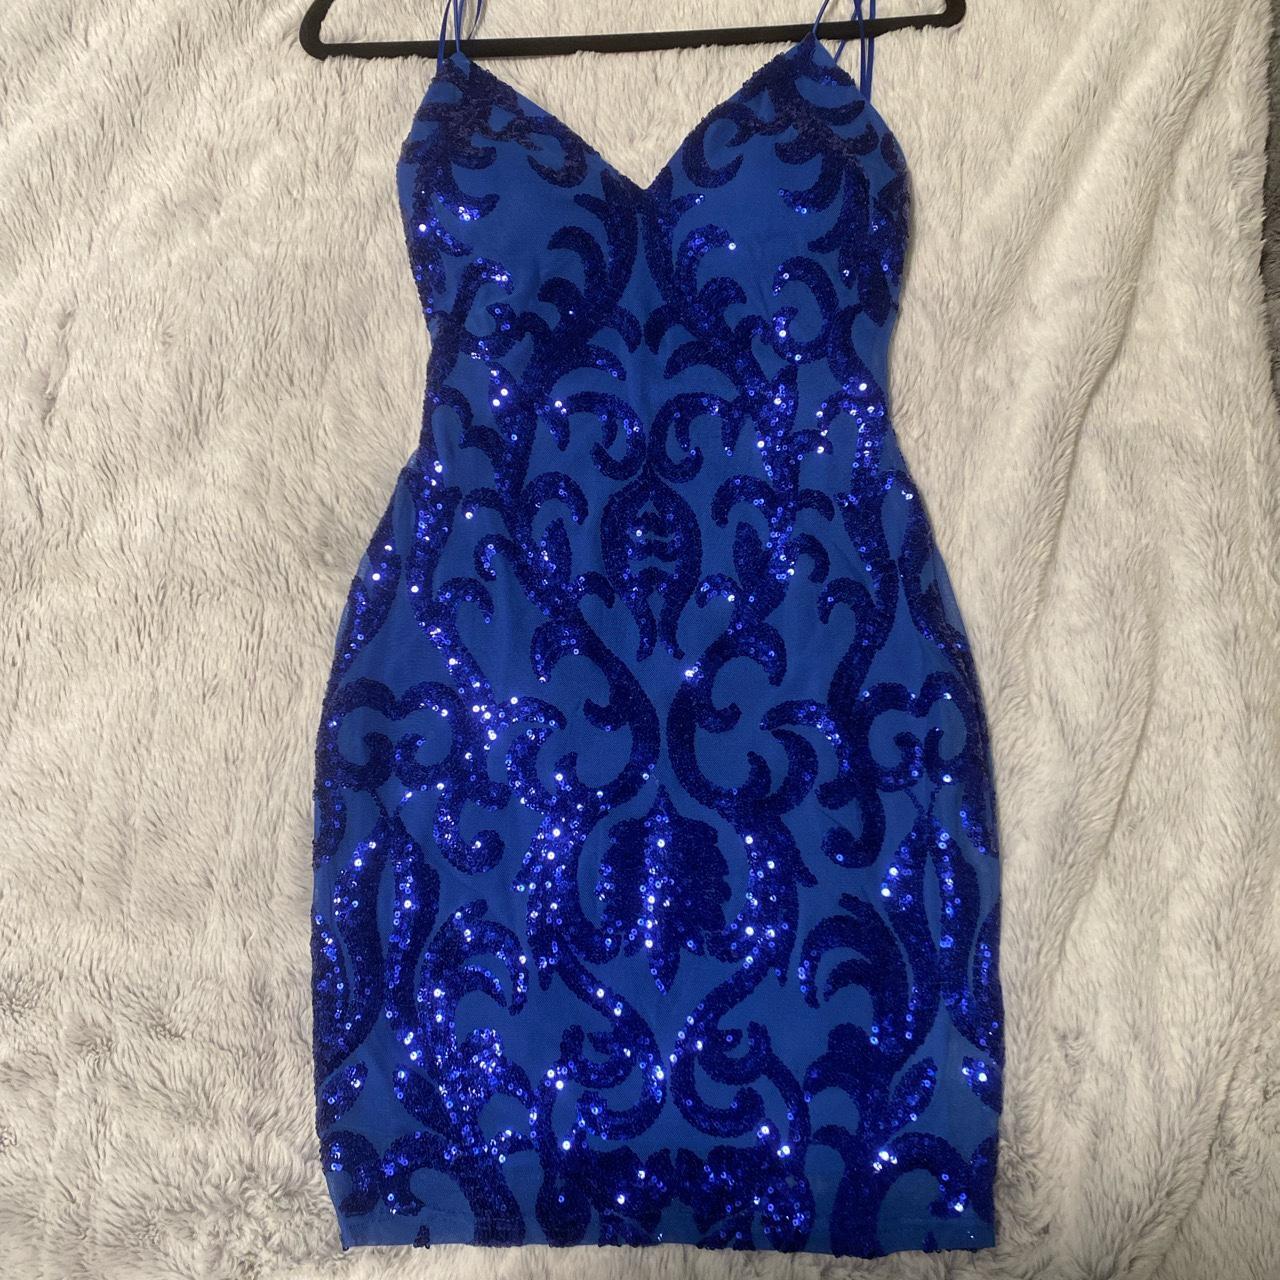 Pretty blue sparkly dress - perfect for a dance or... - Depop